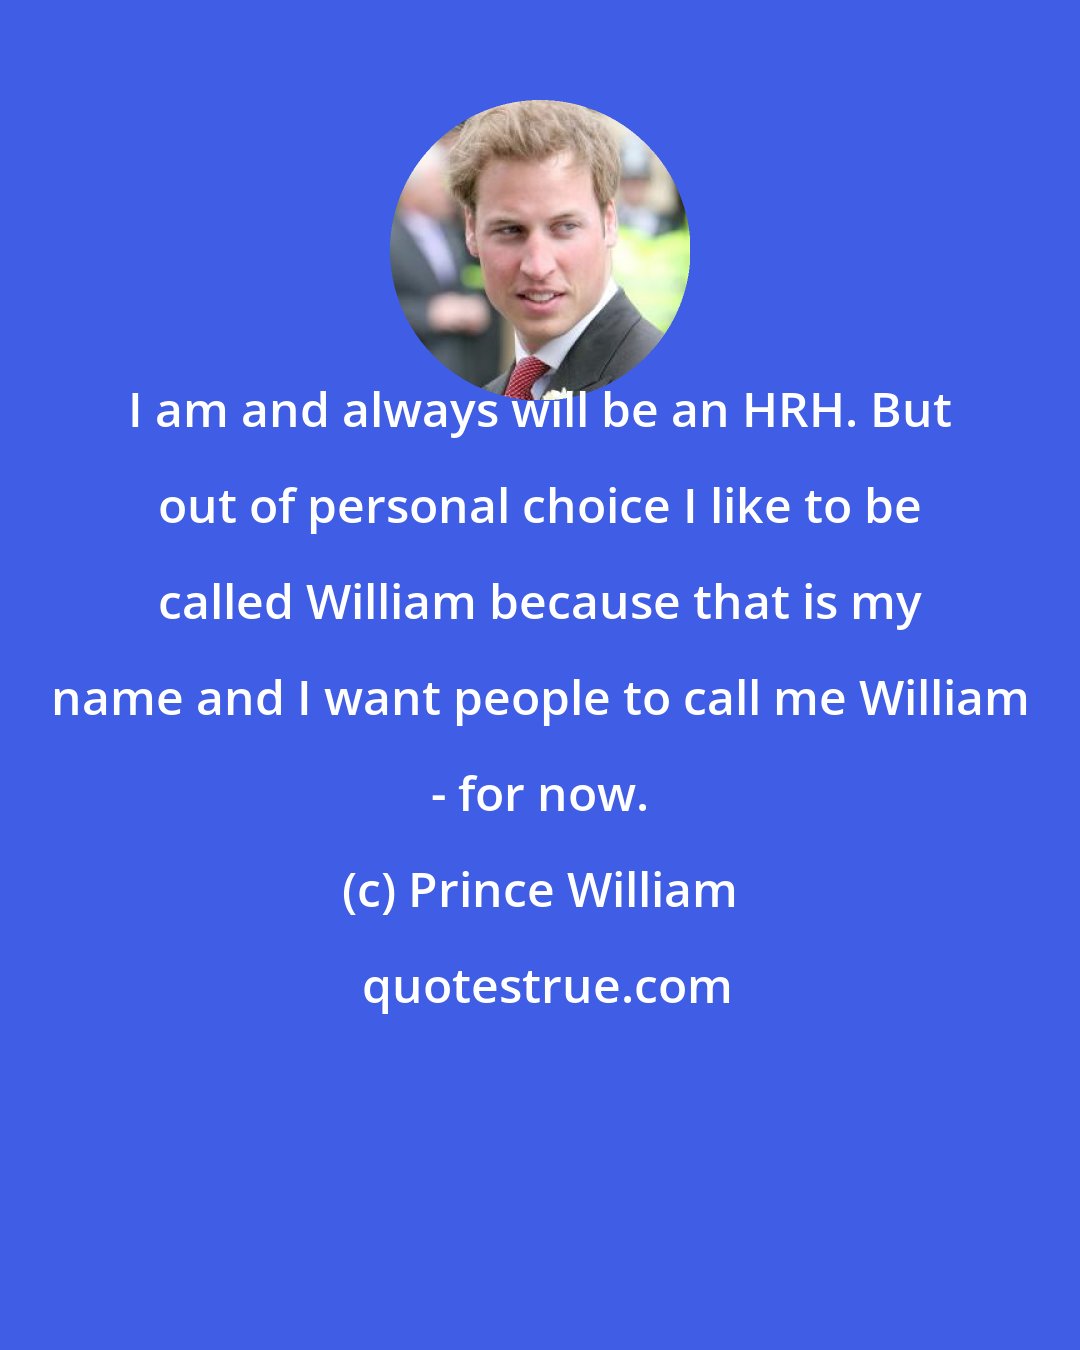 Prince William: I am and always will be an HRH. But out of personal choice I like to be called William because that is my name and I want people to call me William - for now.